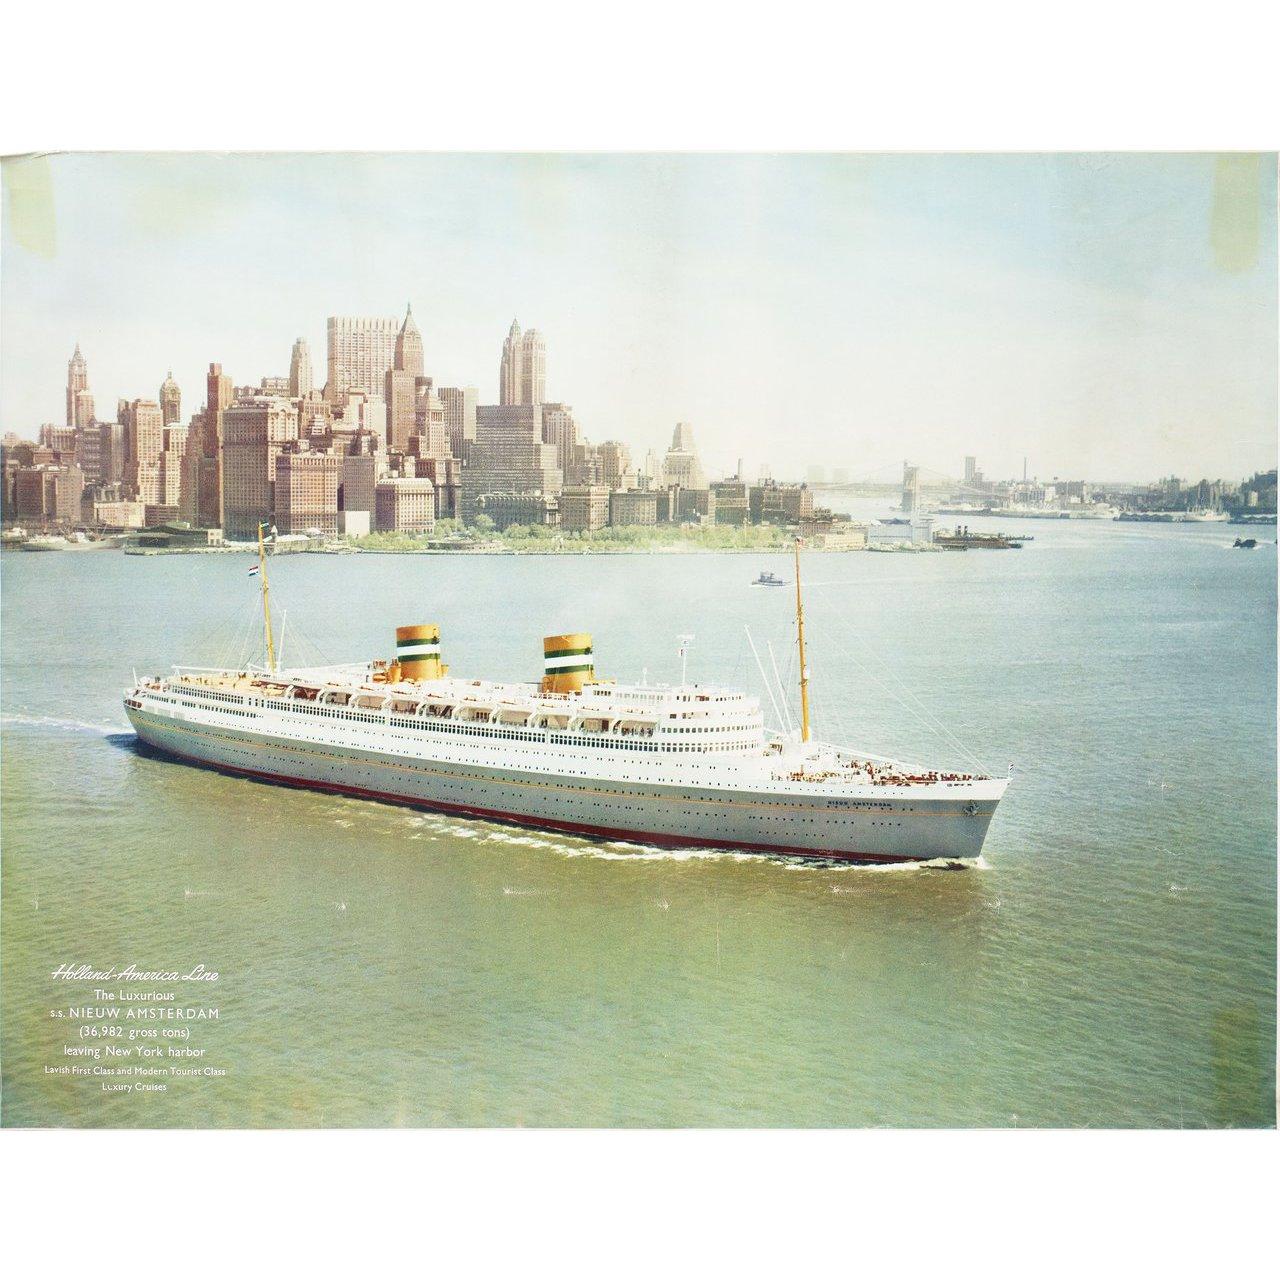 Original 1950s Dutch A1 poster for Holland-America Line, S.S. Nieuw Amsterdam (1950s). Very Good condition, rolled with tape on back. Please note: the size is stated in inches and the actual size can vary by an inch or more.
     